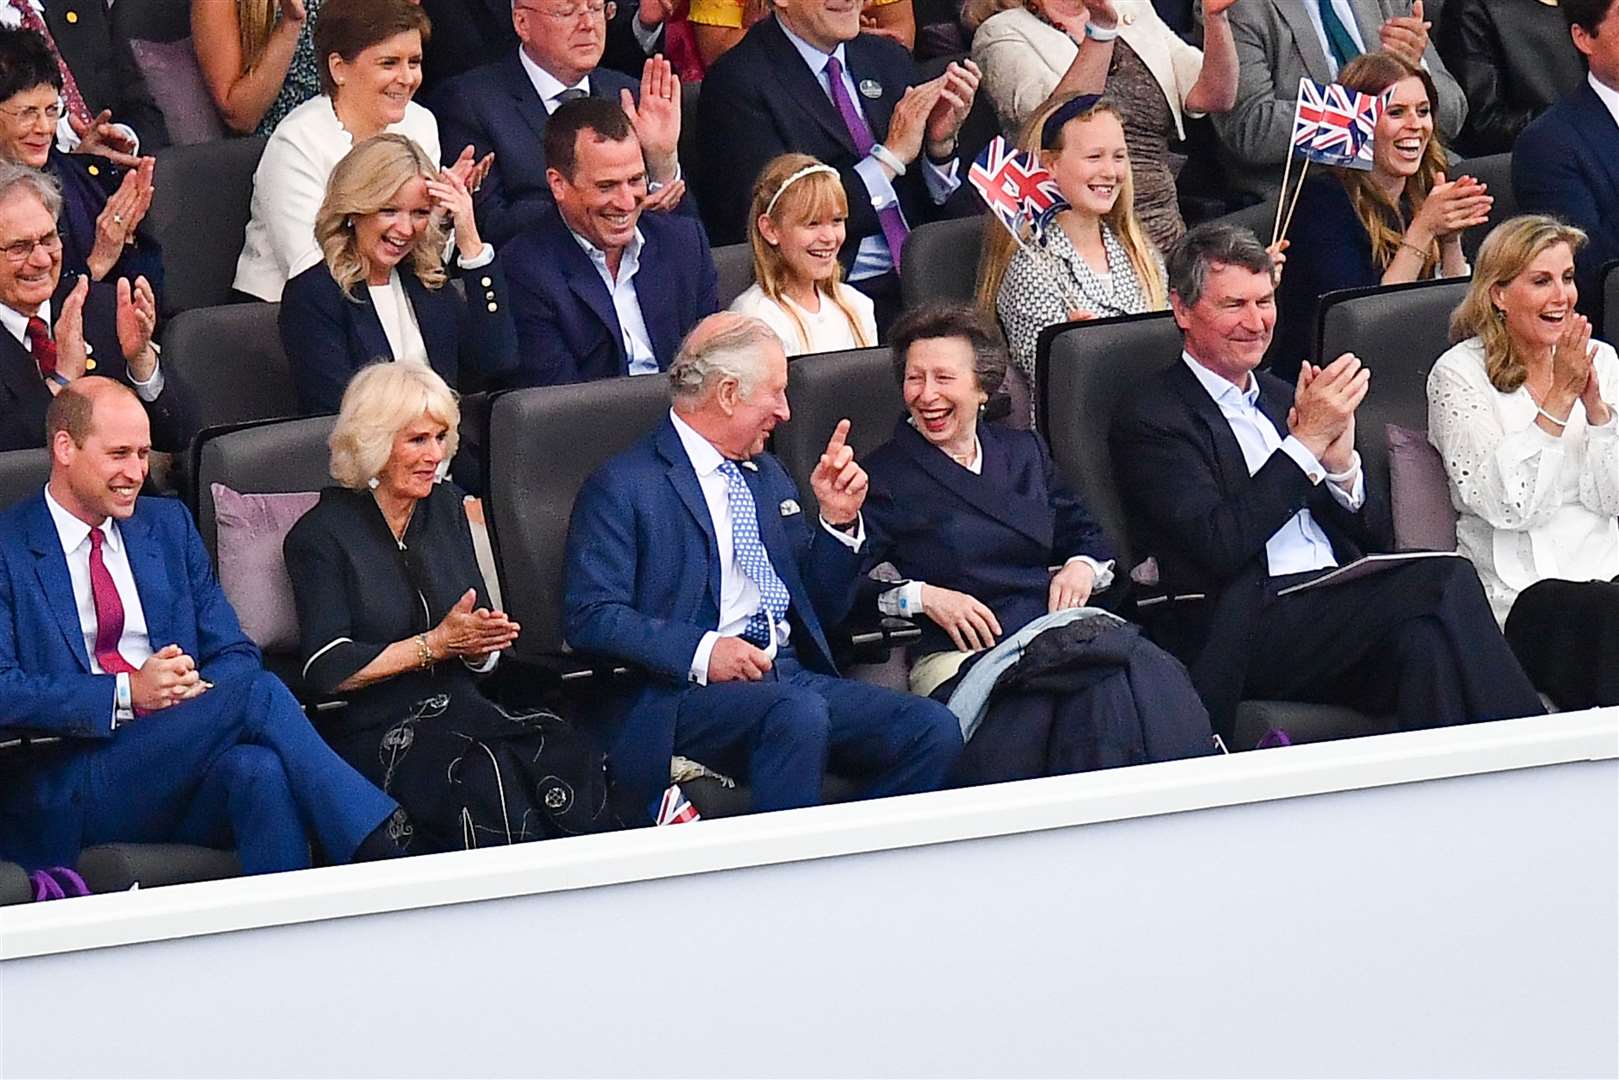 Charles and sister Anne sharing a laugh (Niklas Halle’n/PA)